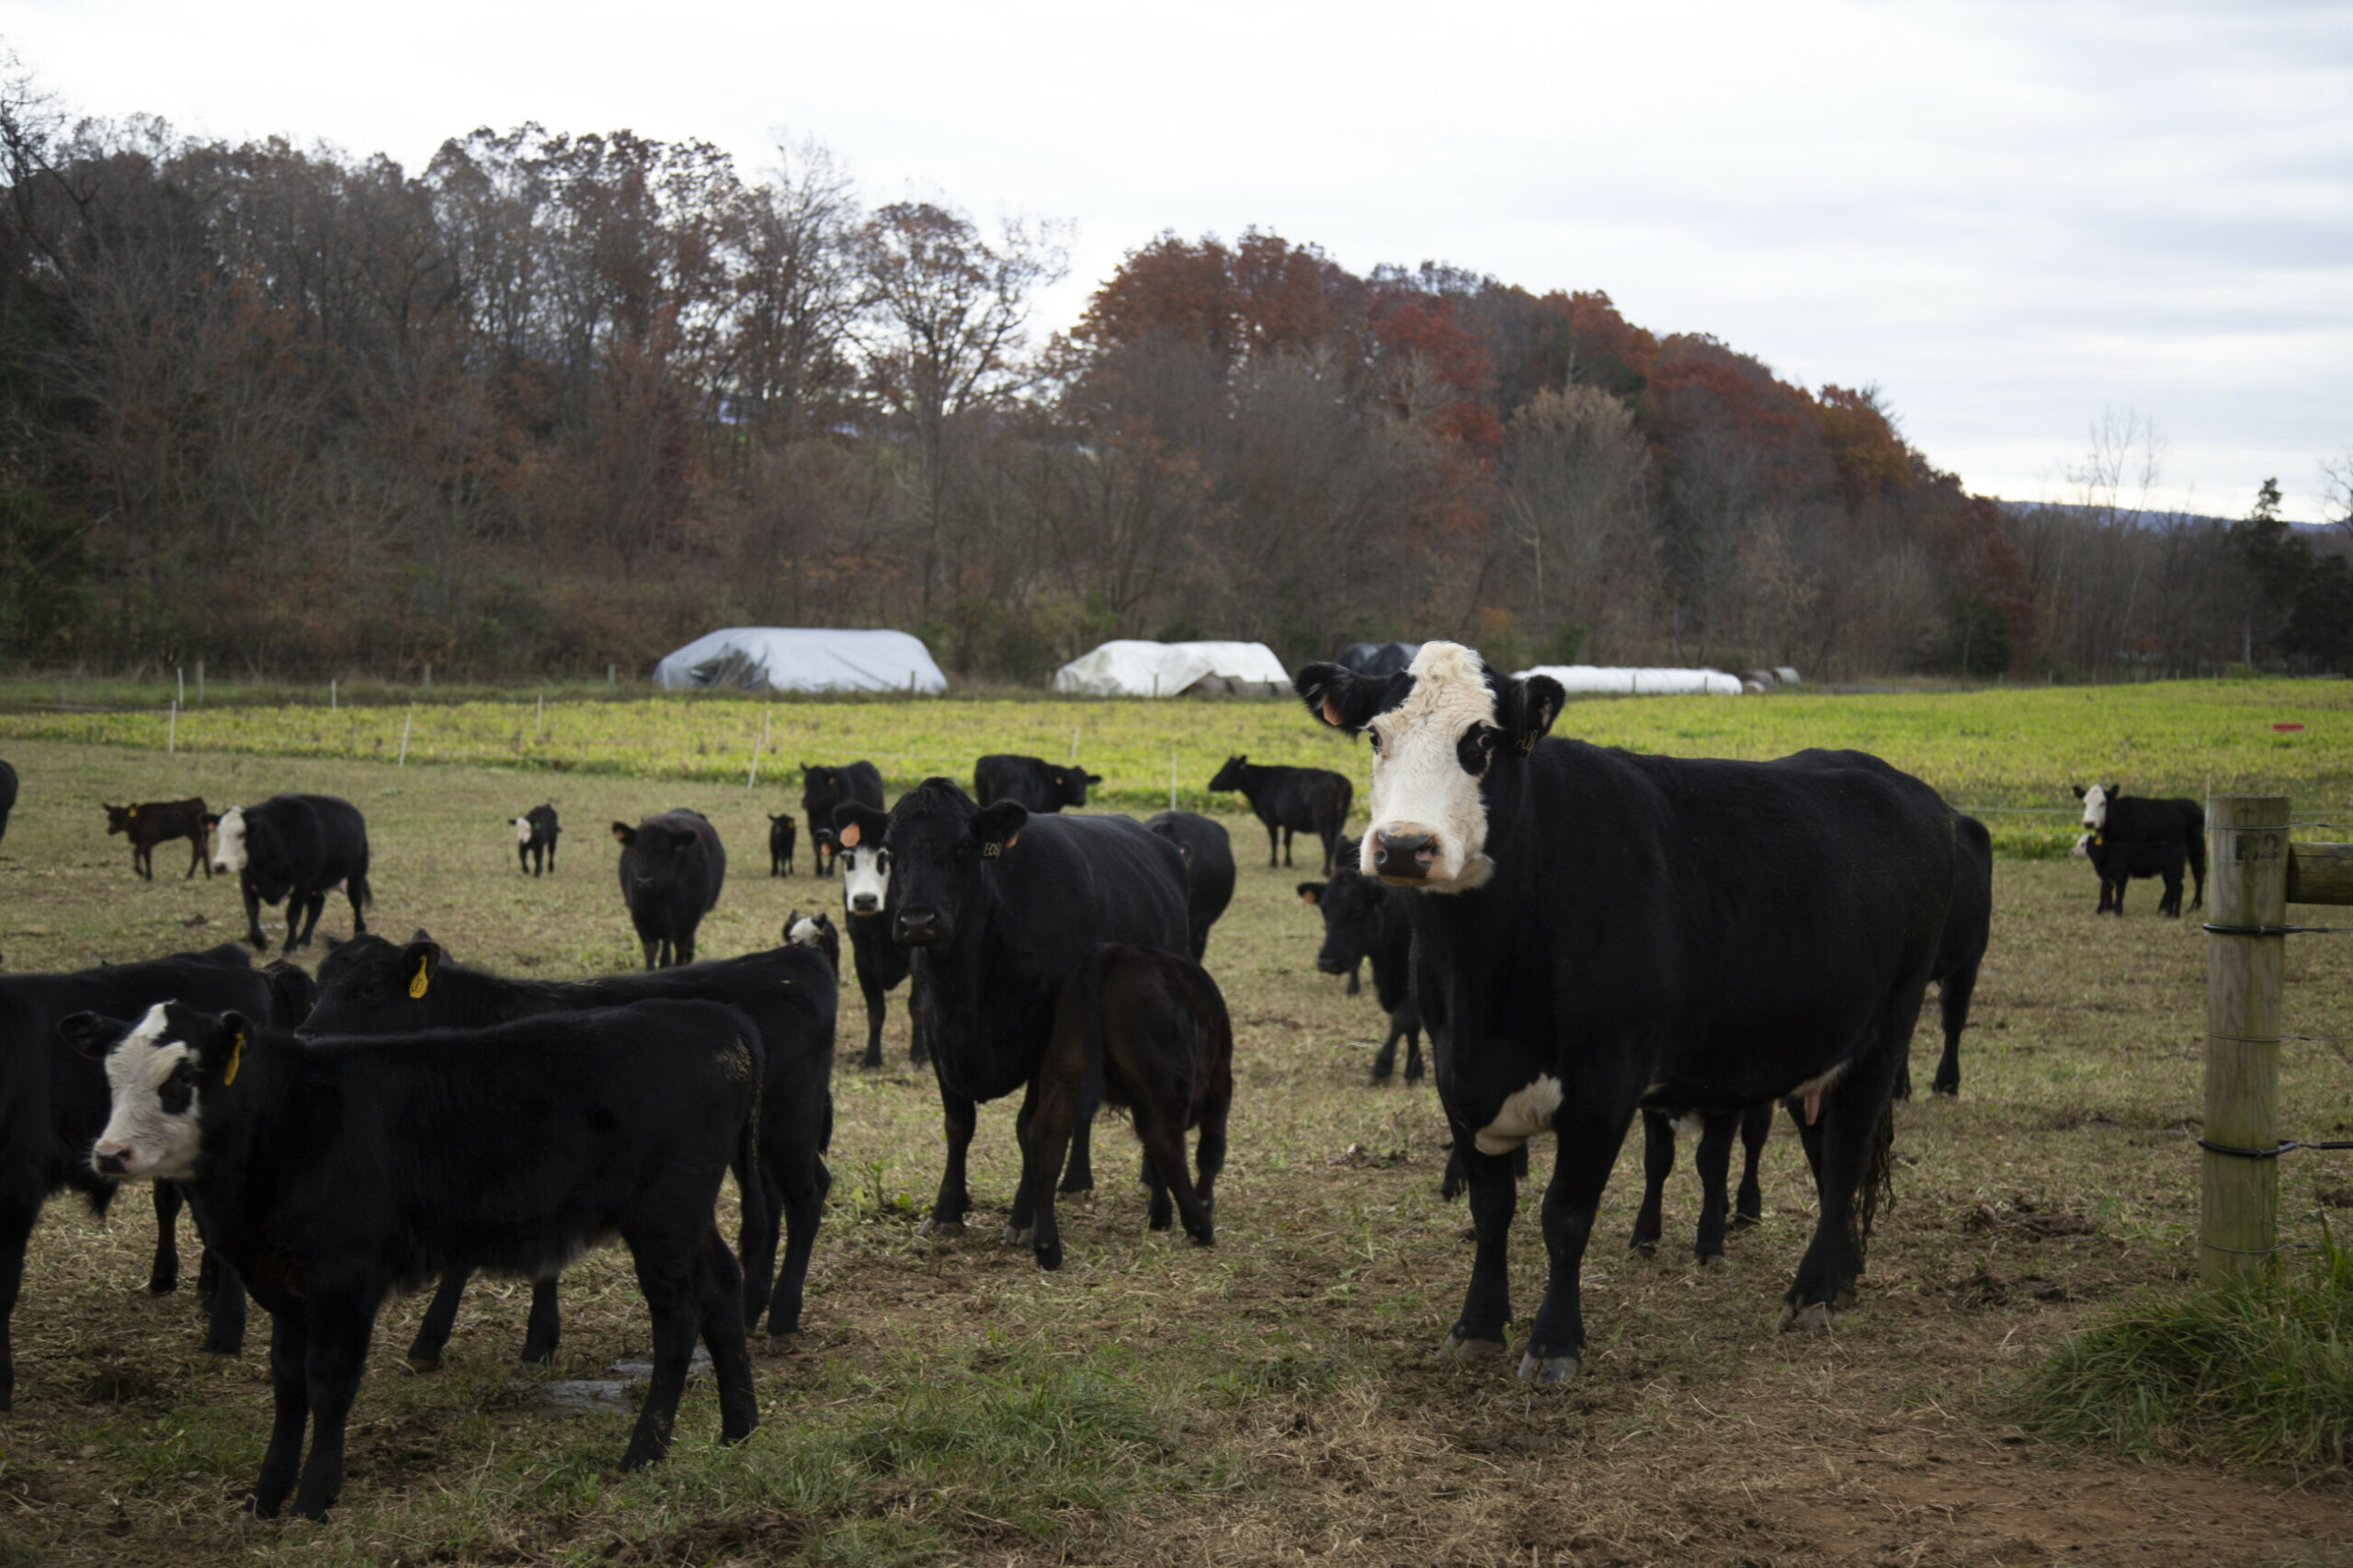 A single cow in a herd of cows in a field pauses to look at the camera. It has a mostly white face and all-black body.